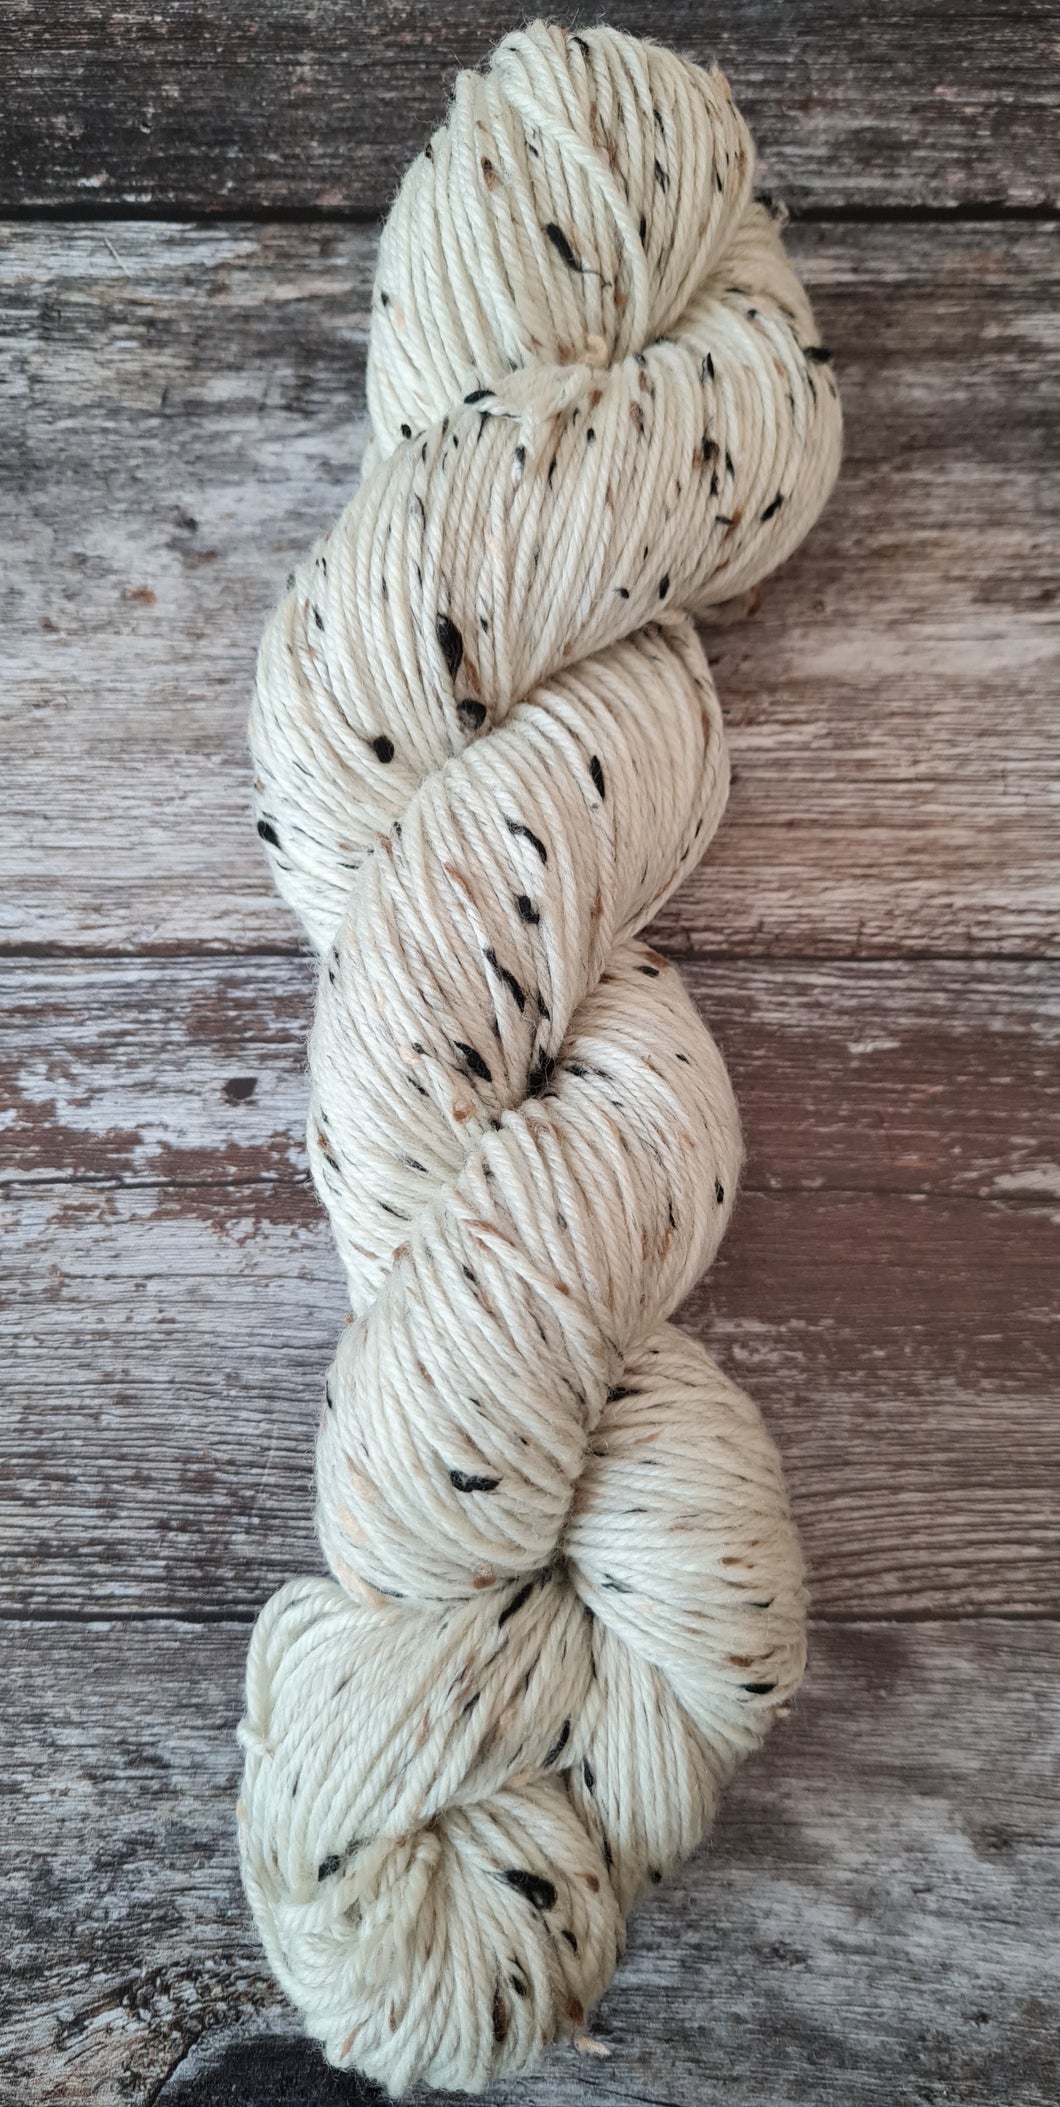 Donegal tweed undyed